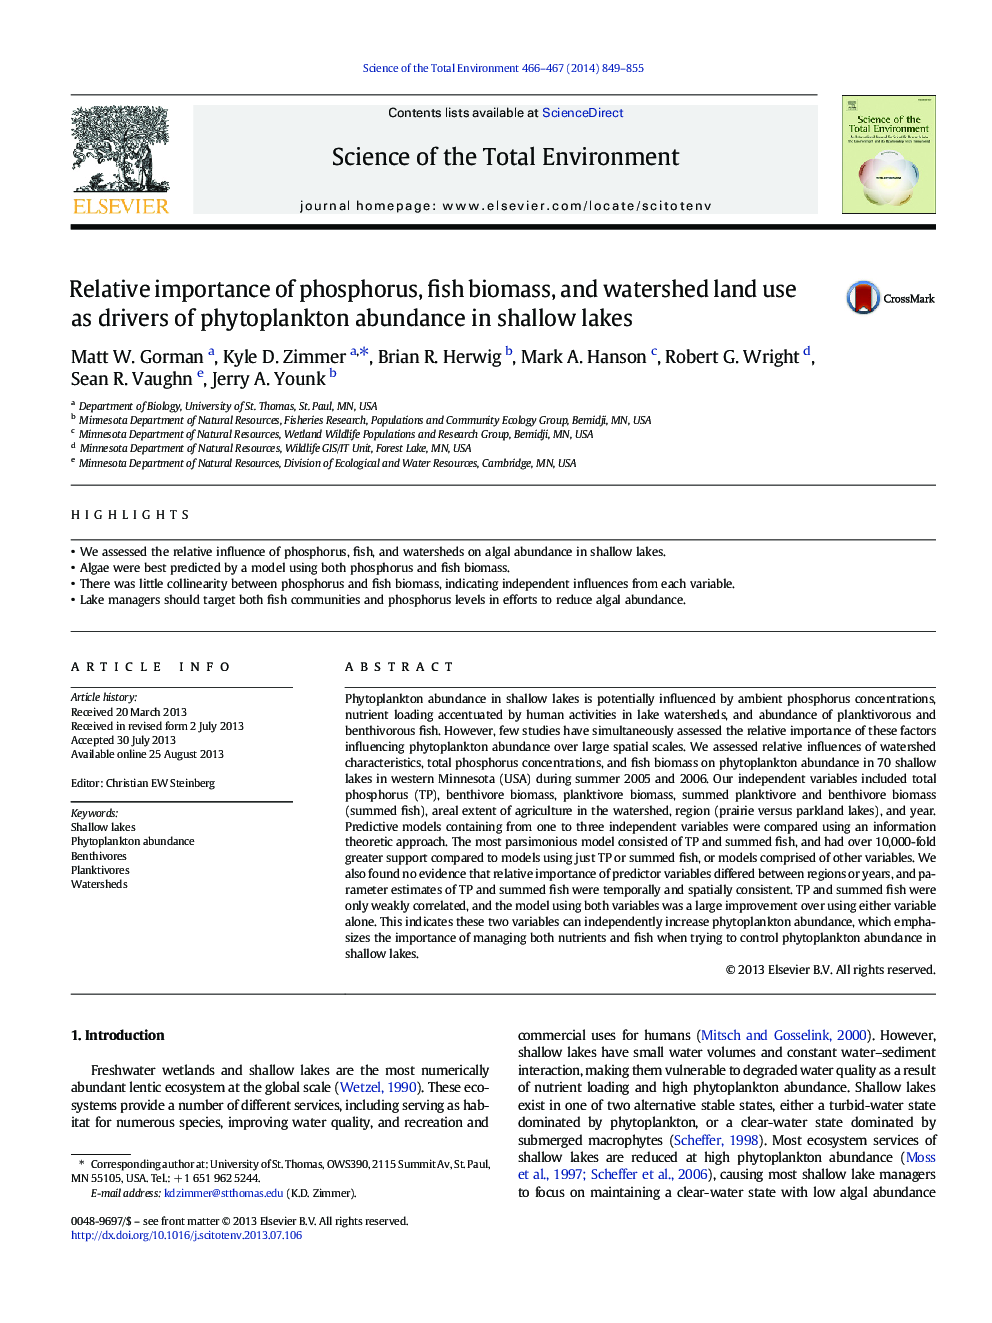 Relative importance of phosphorus, fish biomass, and watershed land use as drivers of phytoplankton abundance in shallow lakes